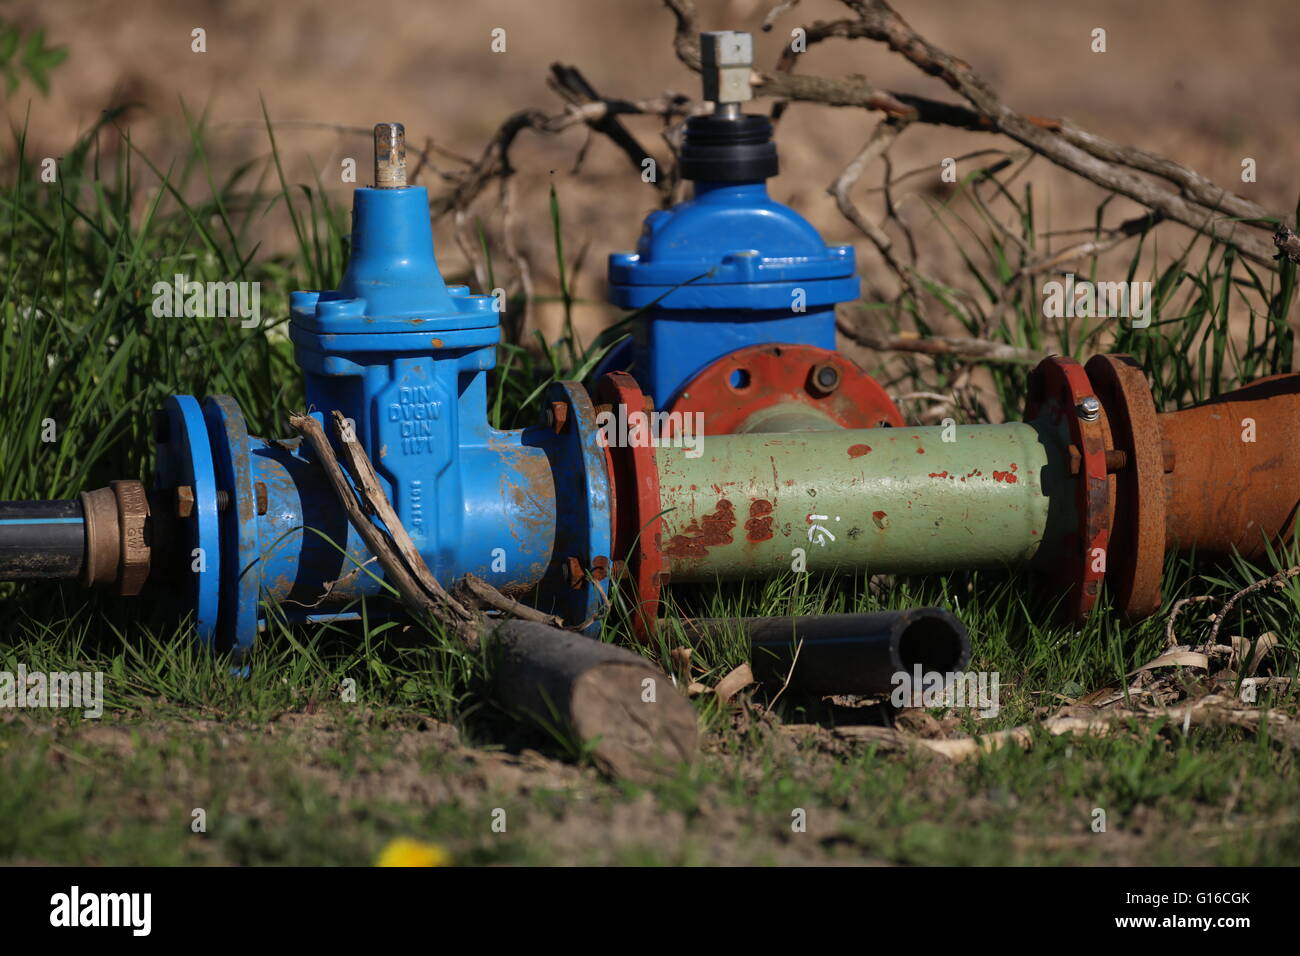 Blue vent outside on field connecting pipe to hose Stock Photo